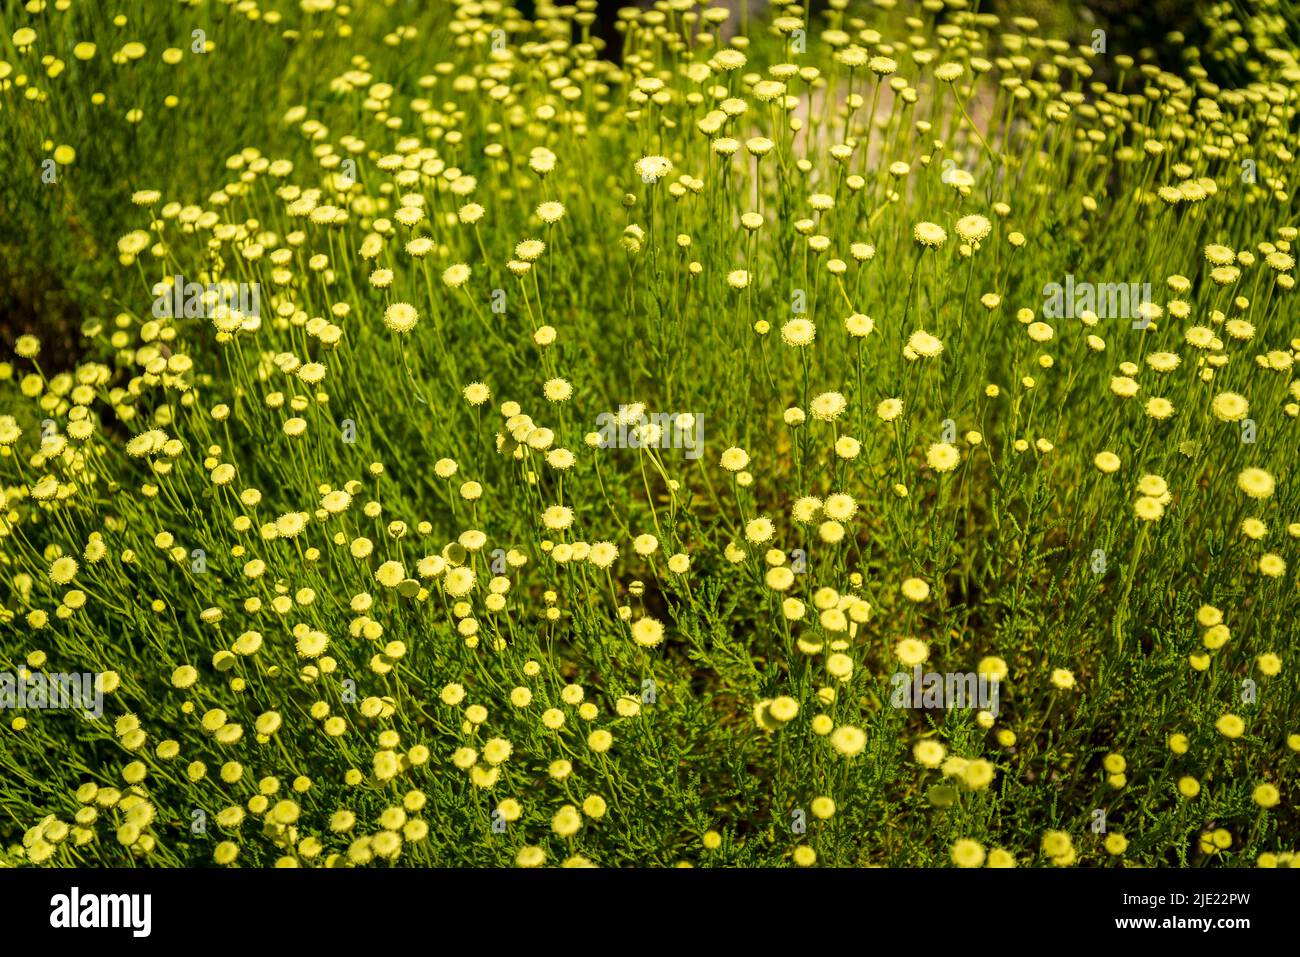 Tansy, The Rock Garden, RHS Wisley Gardens, Surrey, Angleterre, ROYAUME-UNI Banque D'Images